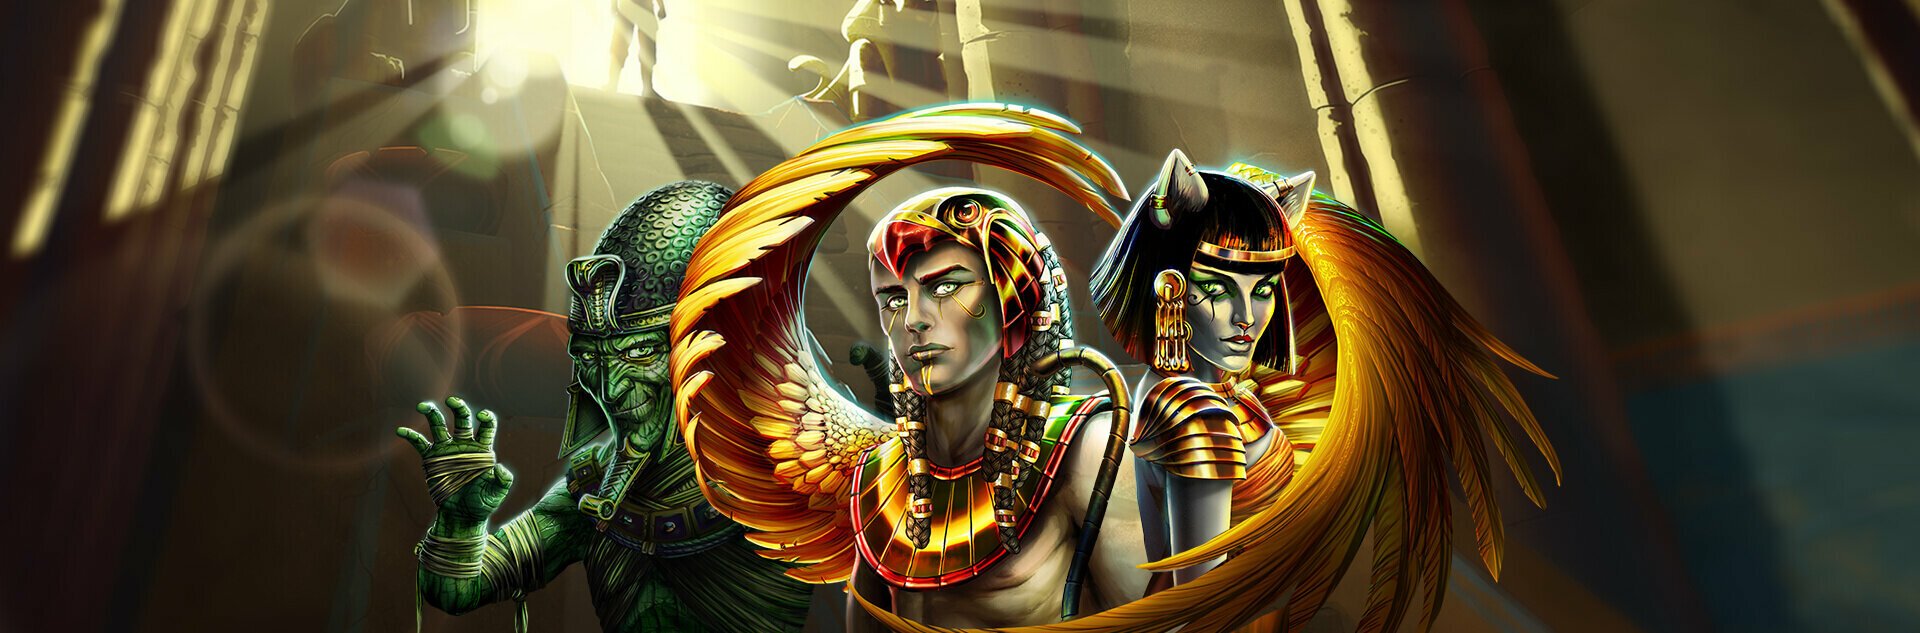 Play Coins of Egypt Free Slot